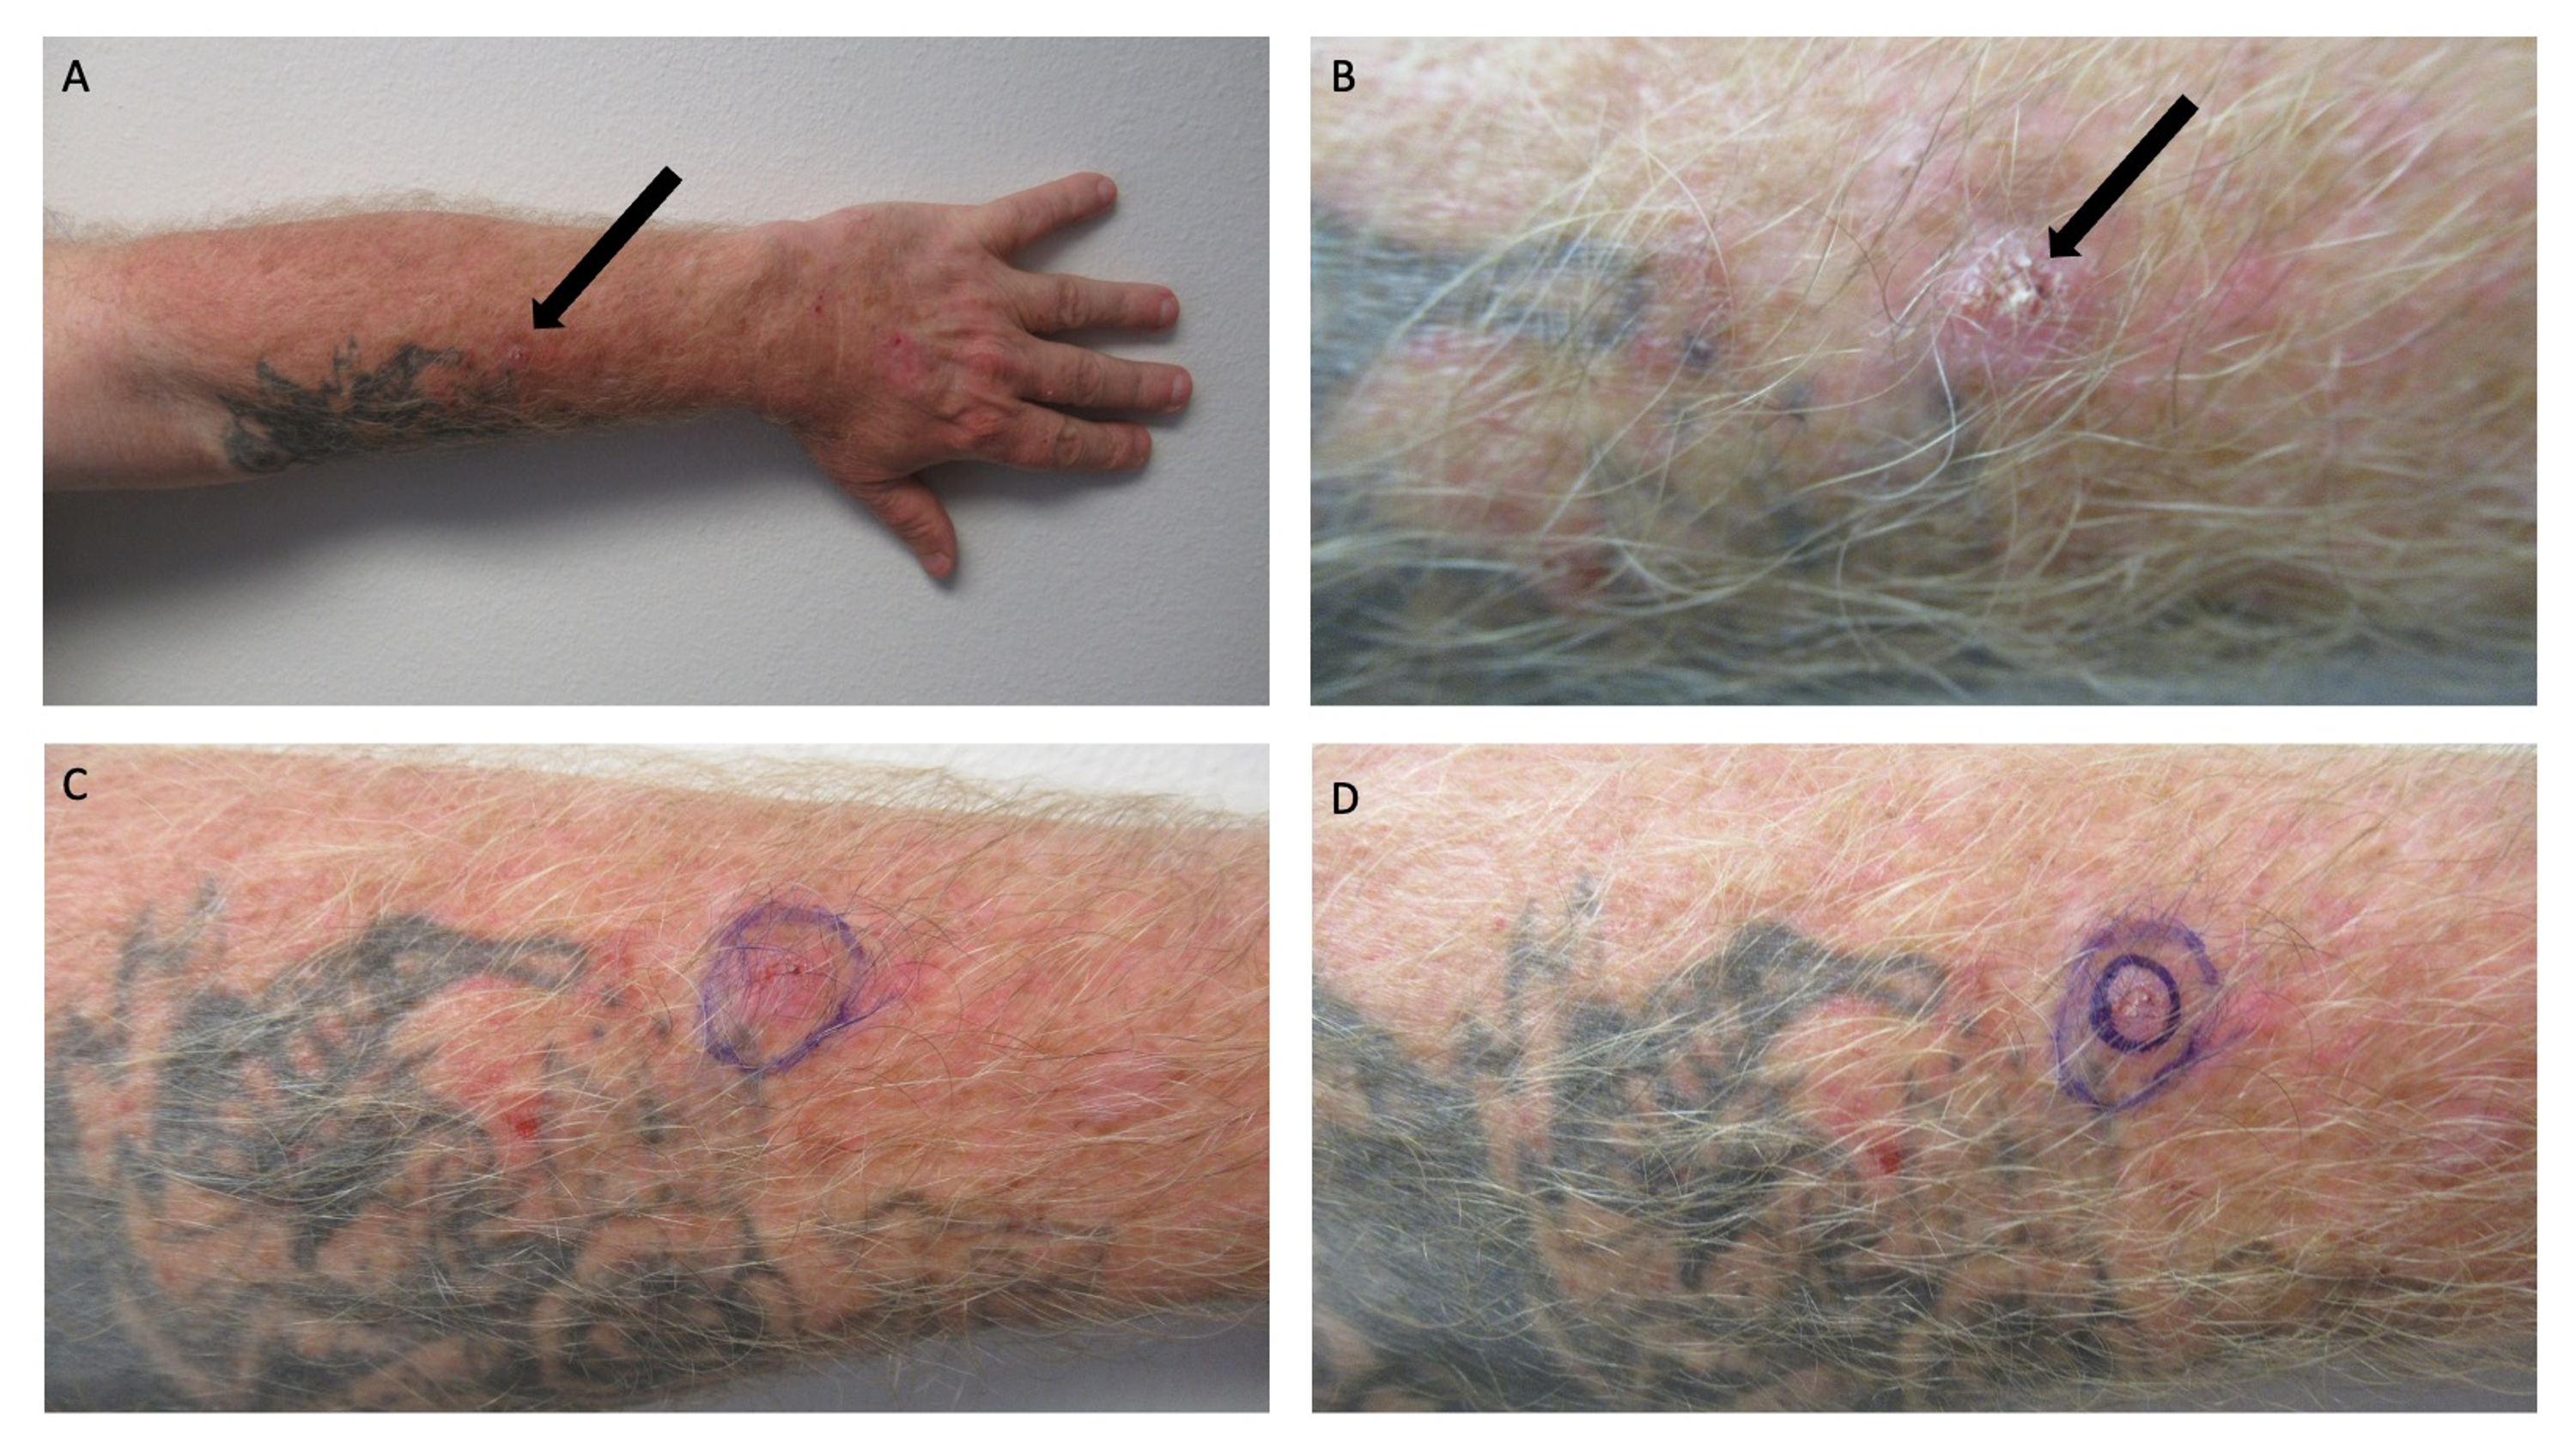 Cureus | Squamous Cell Carcinoma and Tattoo: A Man With a Tattoo-Associated  Squamous Cell Carcinoma and Review of Benign Tumors, Lymphoid Conditions,  and Malignant Neoplasms Occurring Within a Tattoo | Article